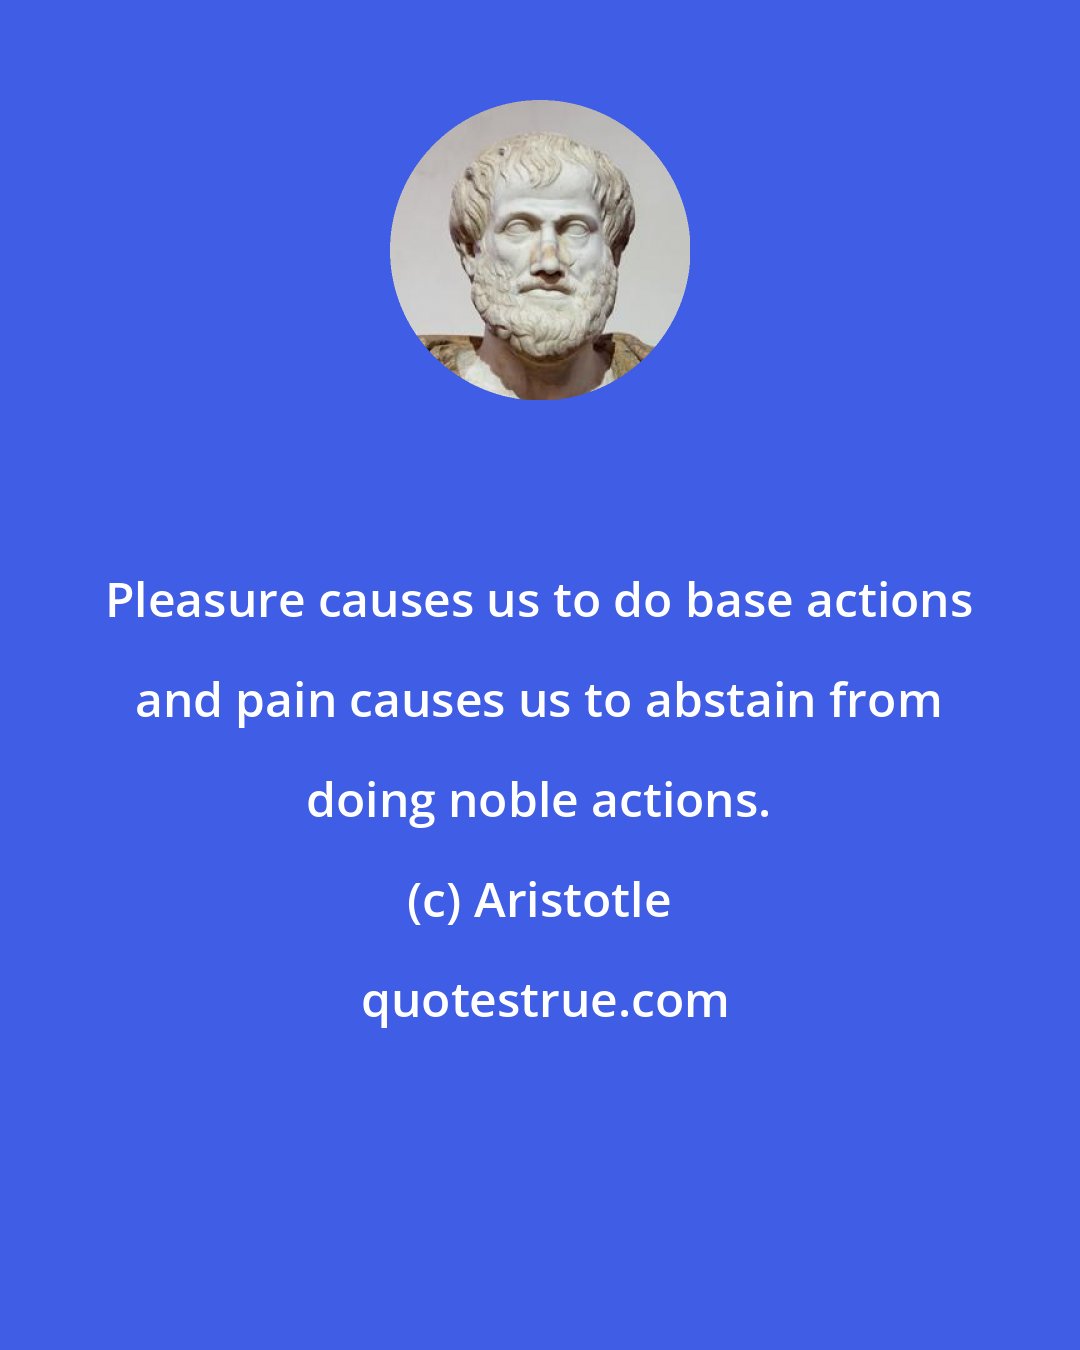 Aristotle: Pleasure causes us to do base actions and pain causes us to abstain from doing noble actions.